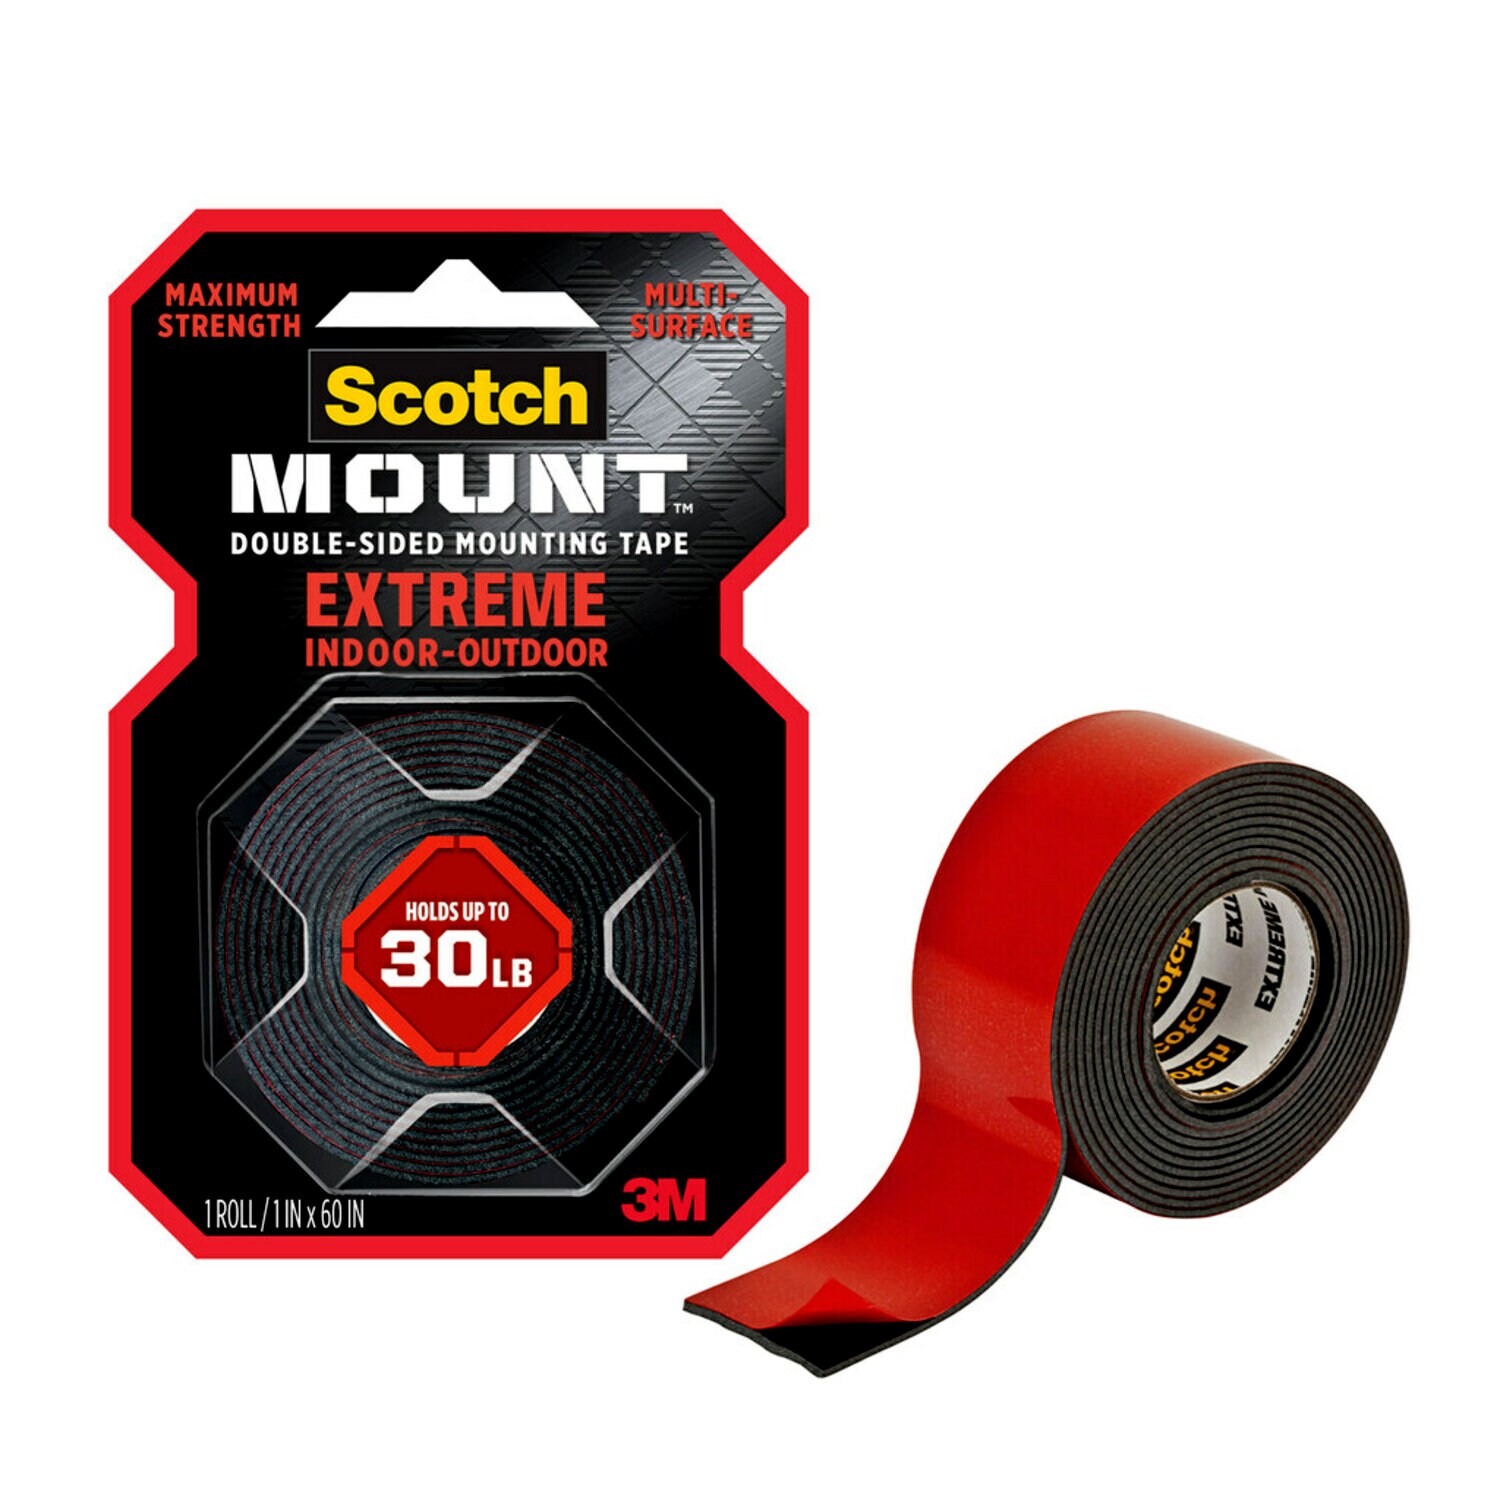 7100205652 - Scotch-Mount Extreme Double-Sided Mounting Tape 414H, 1 In X 60 In
(2,54 Cm X 1,52 M)